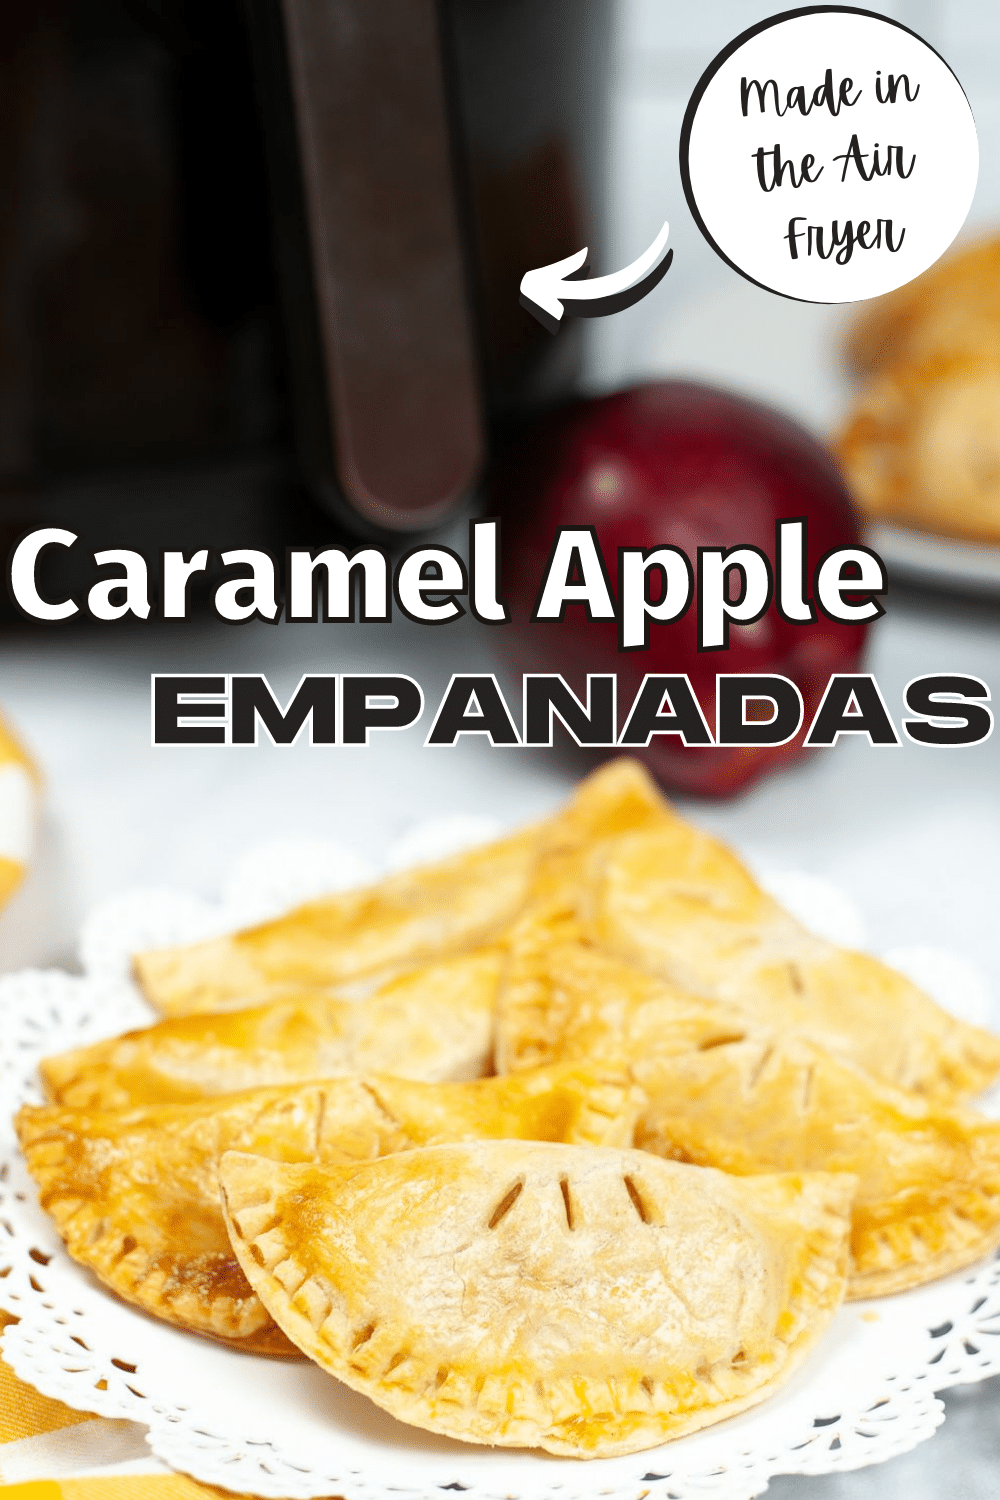 Air Fryer Caramel Apple Empanadas are tender pastries filled with caramel apple filling. They are easy, delicious & the perfect fall dessert. #airfryer #empanadas #caramelapple #fall #dessert via @wondermomwannab